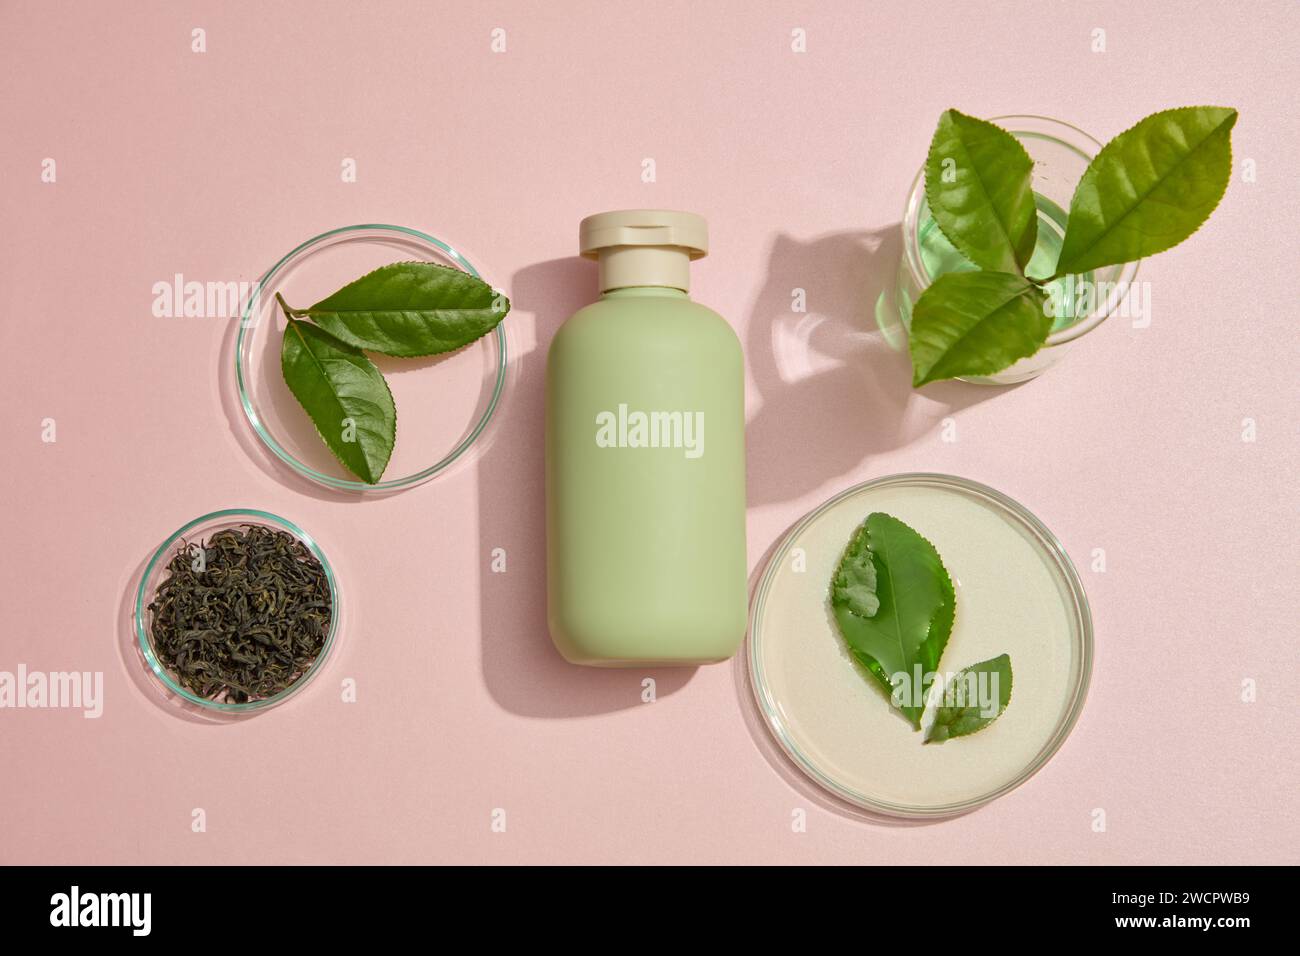 Unlabeled cosmetic bottle decorated with petri dishes of fresh and dried green tea leaves. Green tea (Camellia sinensis) can improve brain function an Stock Photo